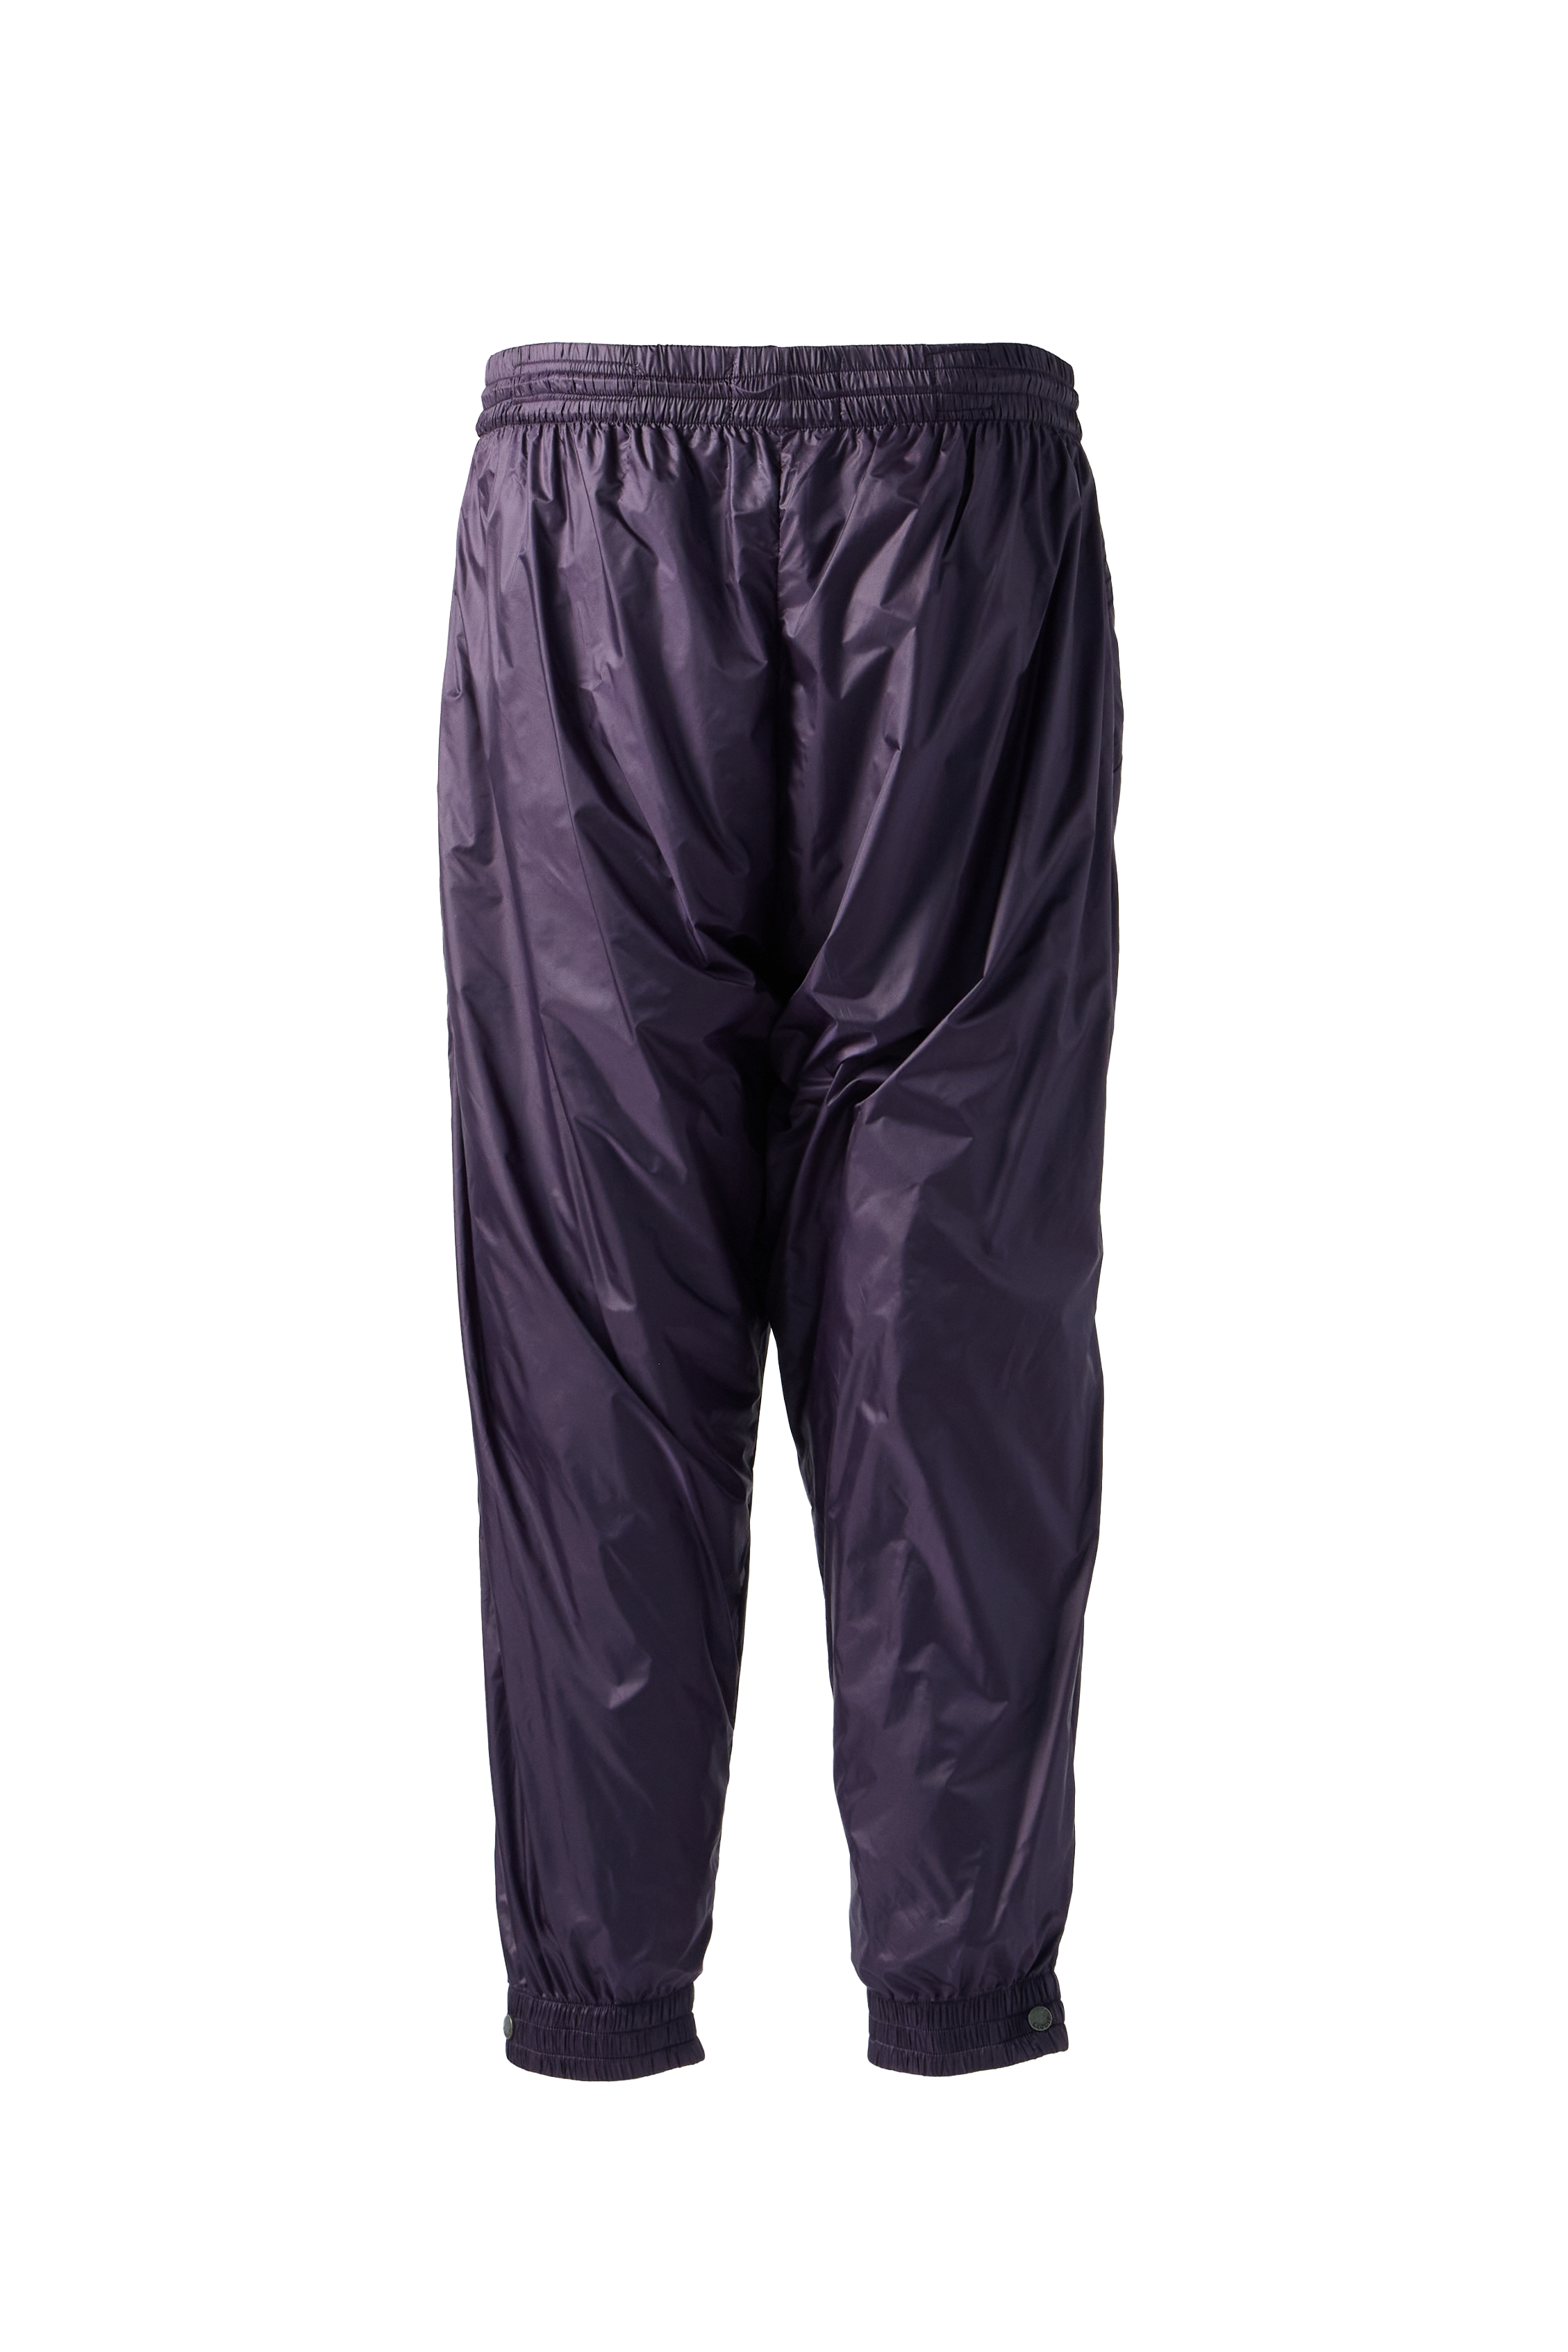 L'EQUIP - Baggies Trackpant product image